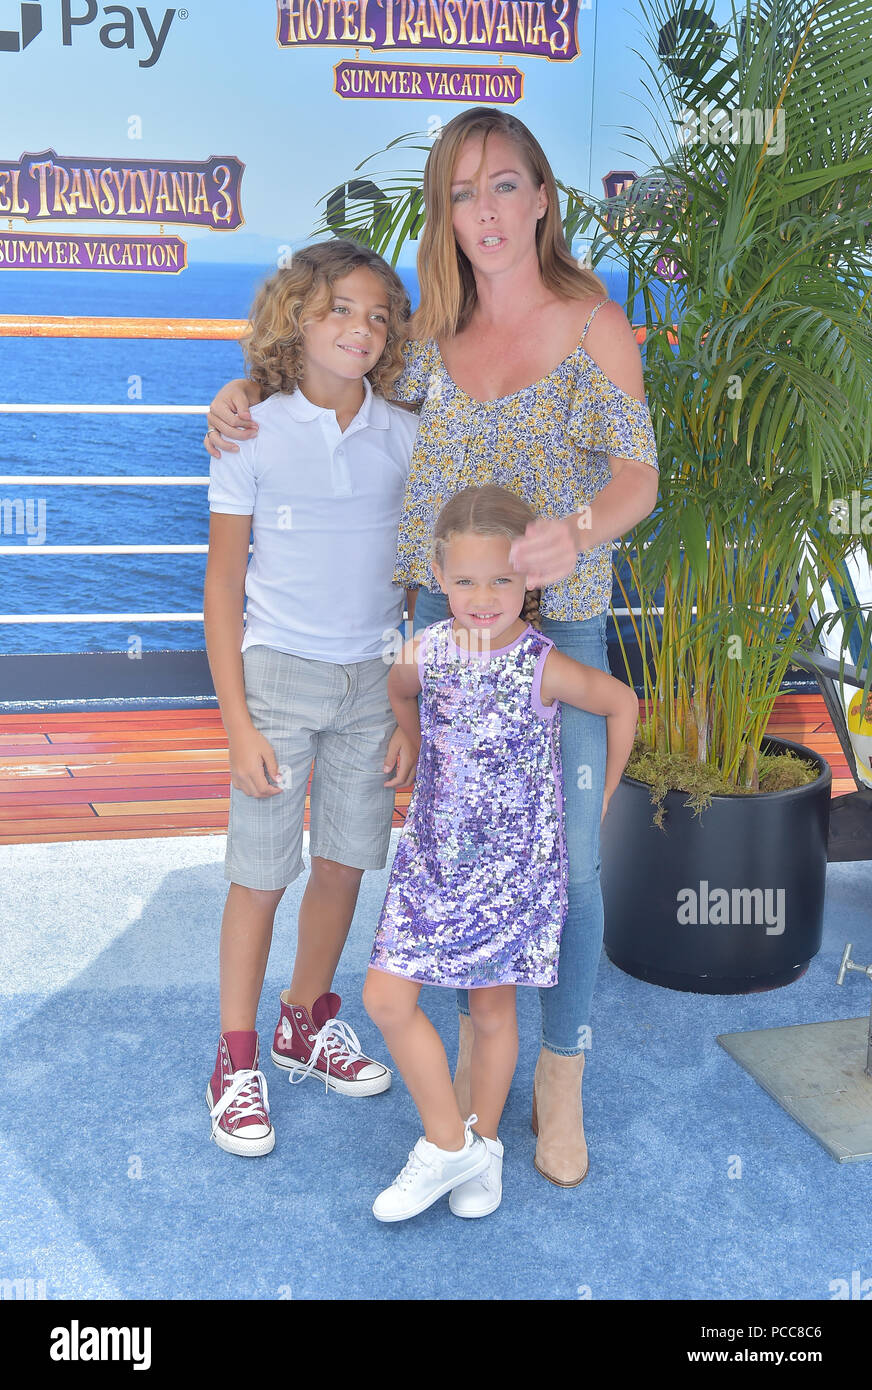 Columbia Pictures And Sony Pictures Animation's World Premiere Of 'Hotel Transylvania 3: Summer Vacation'  Featuring: Kendra Wilkinson, Hank Baskett IV, Alijah Mary Baskett Where: Westwood, California, United States When: 30 Jun 2018 Credit: FayesVision/WENN.com Stock Photo